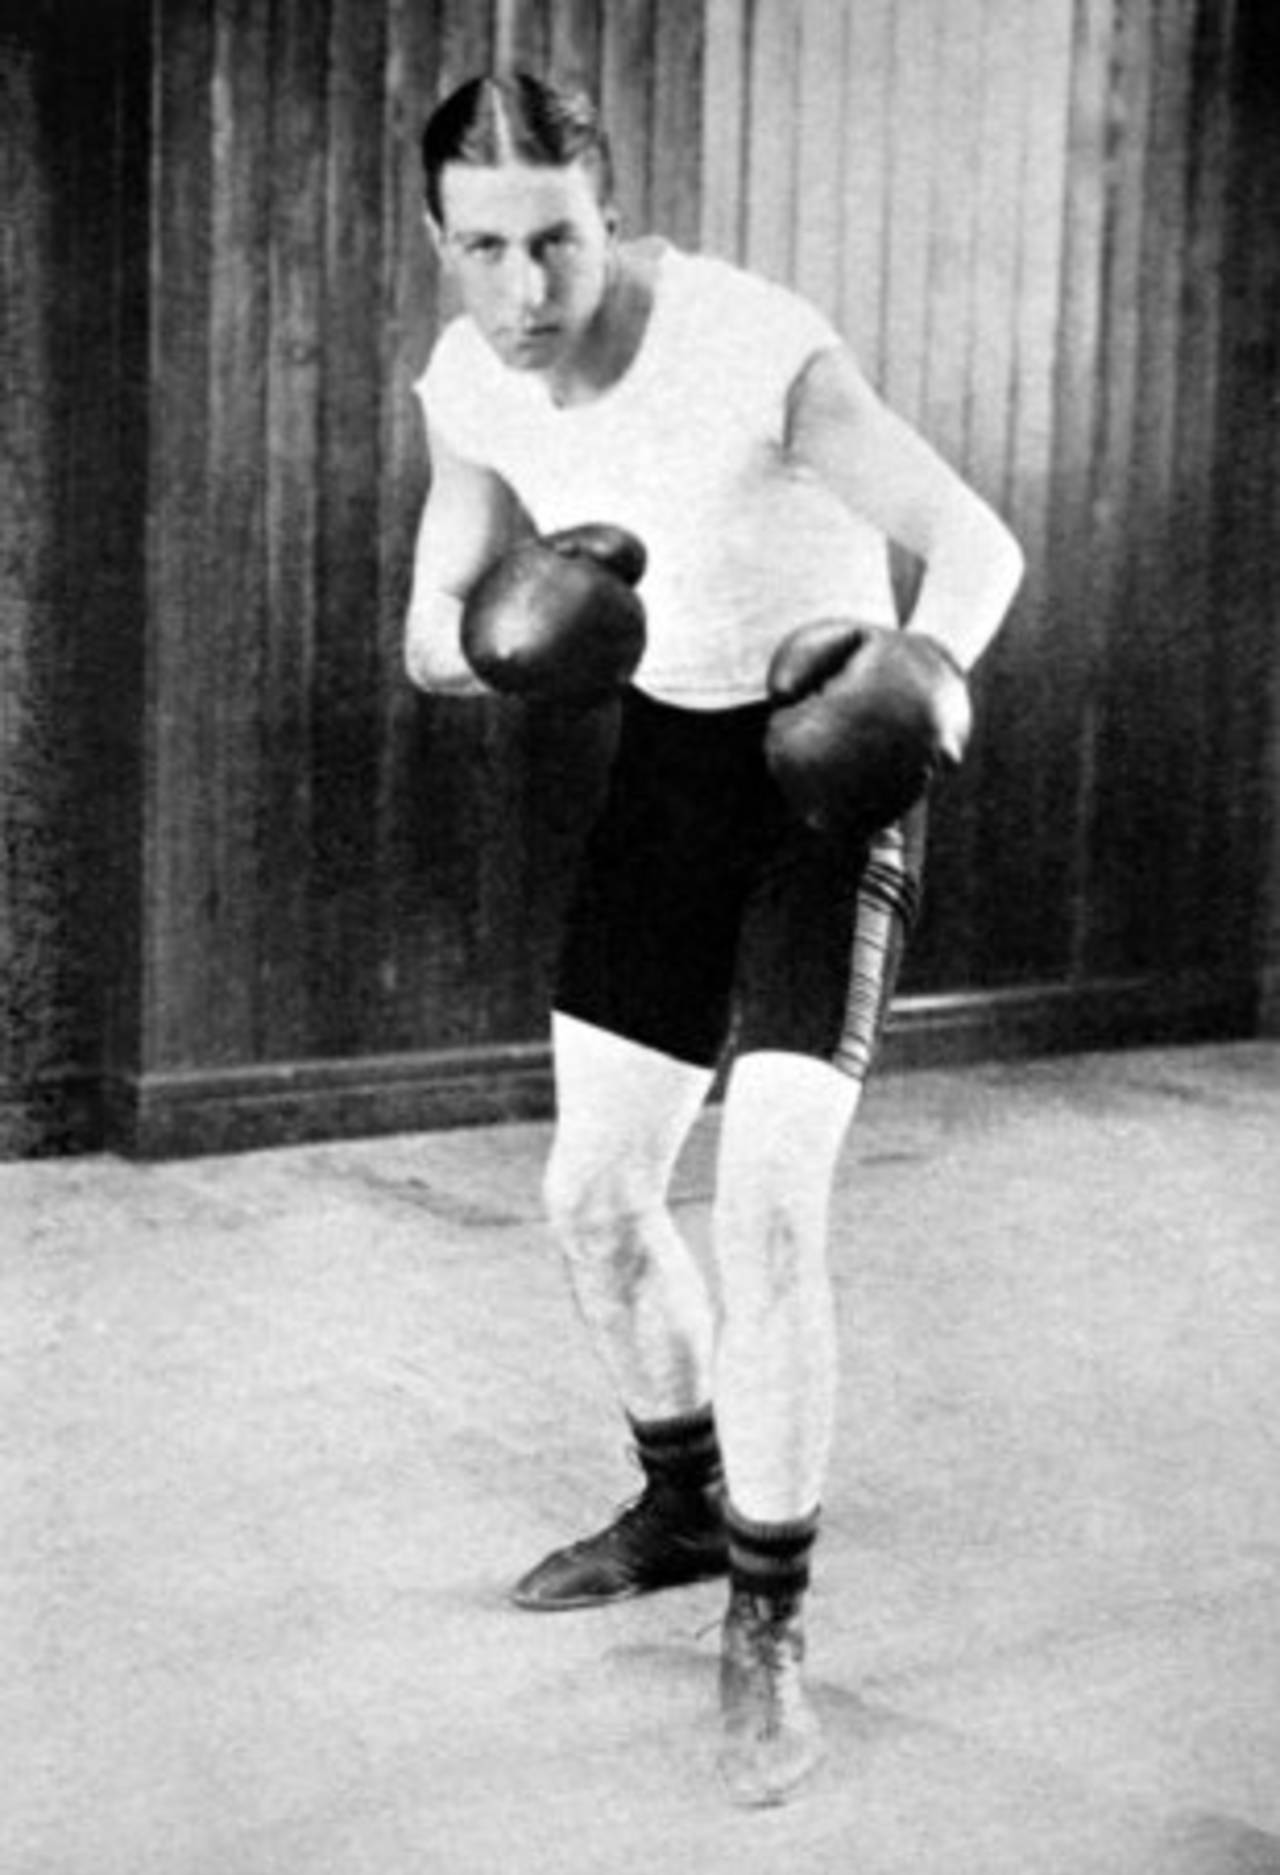 England captain Johnny Douglas won the middleweight title at the 1908 London Olympics, October 27, 1908